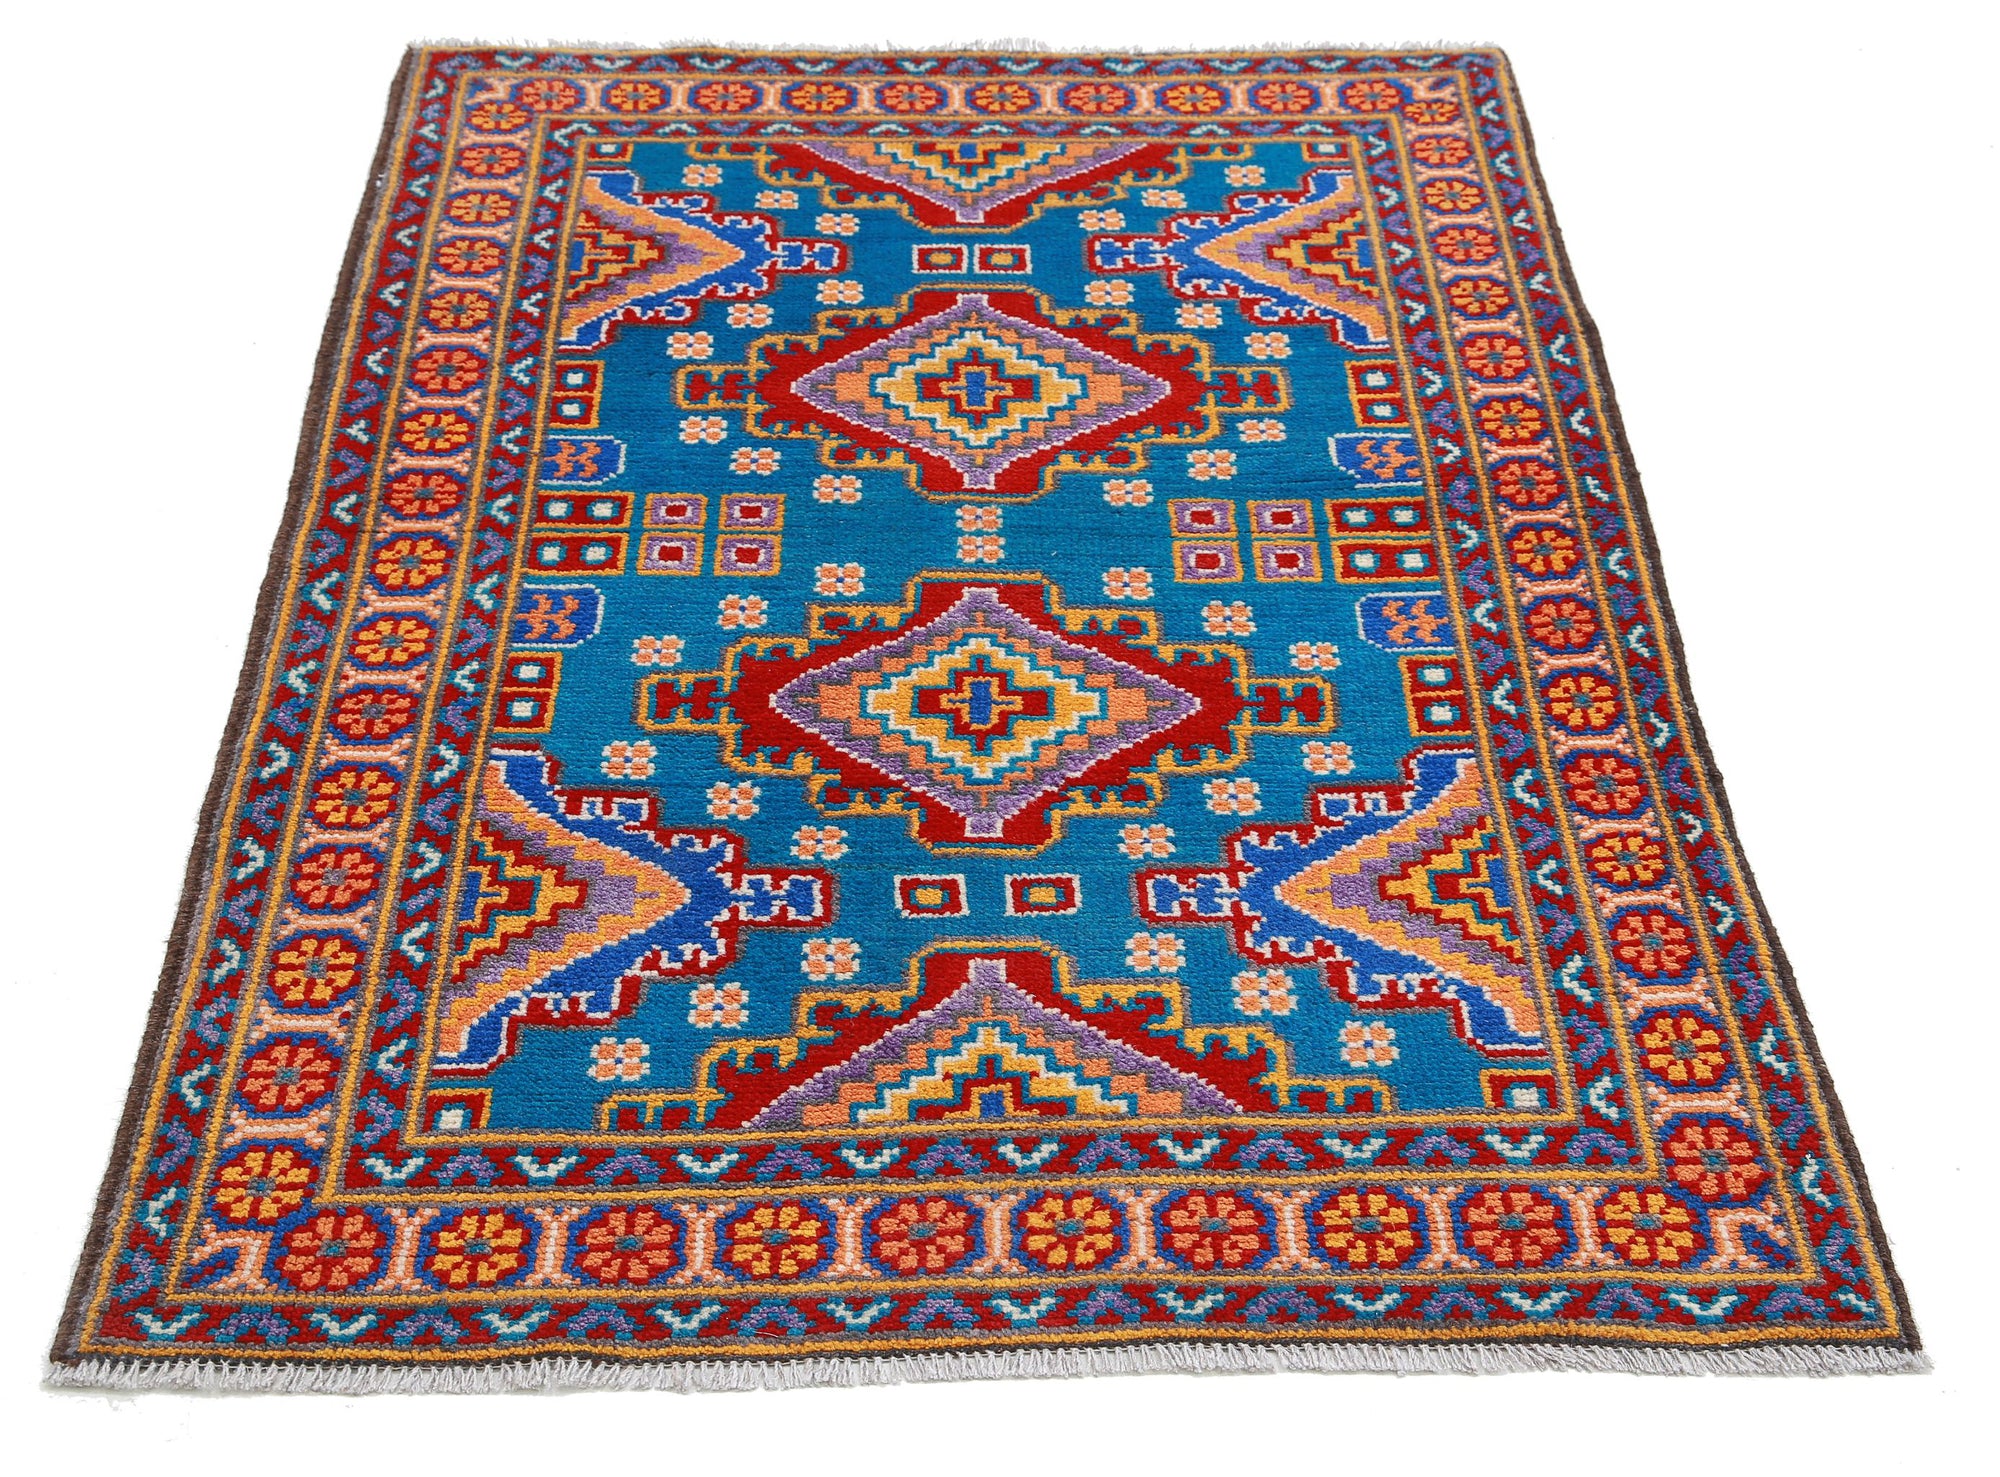 Revival-hand-knotted-qarghani-wool-rug-5014204-3.jpg